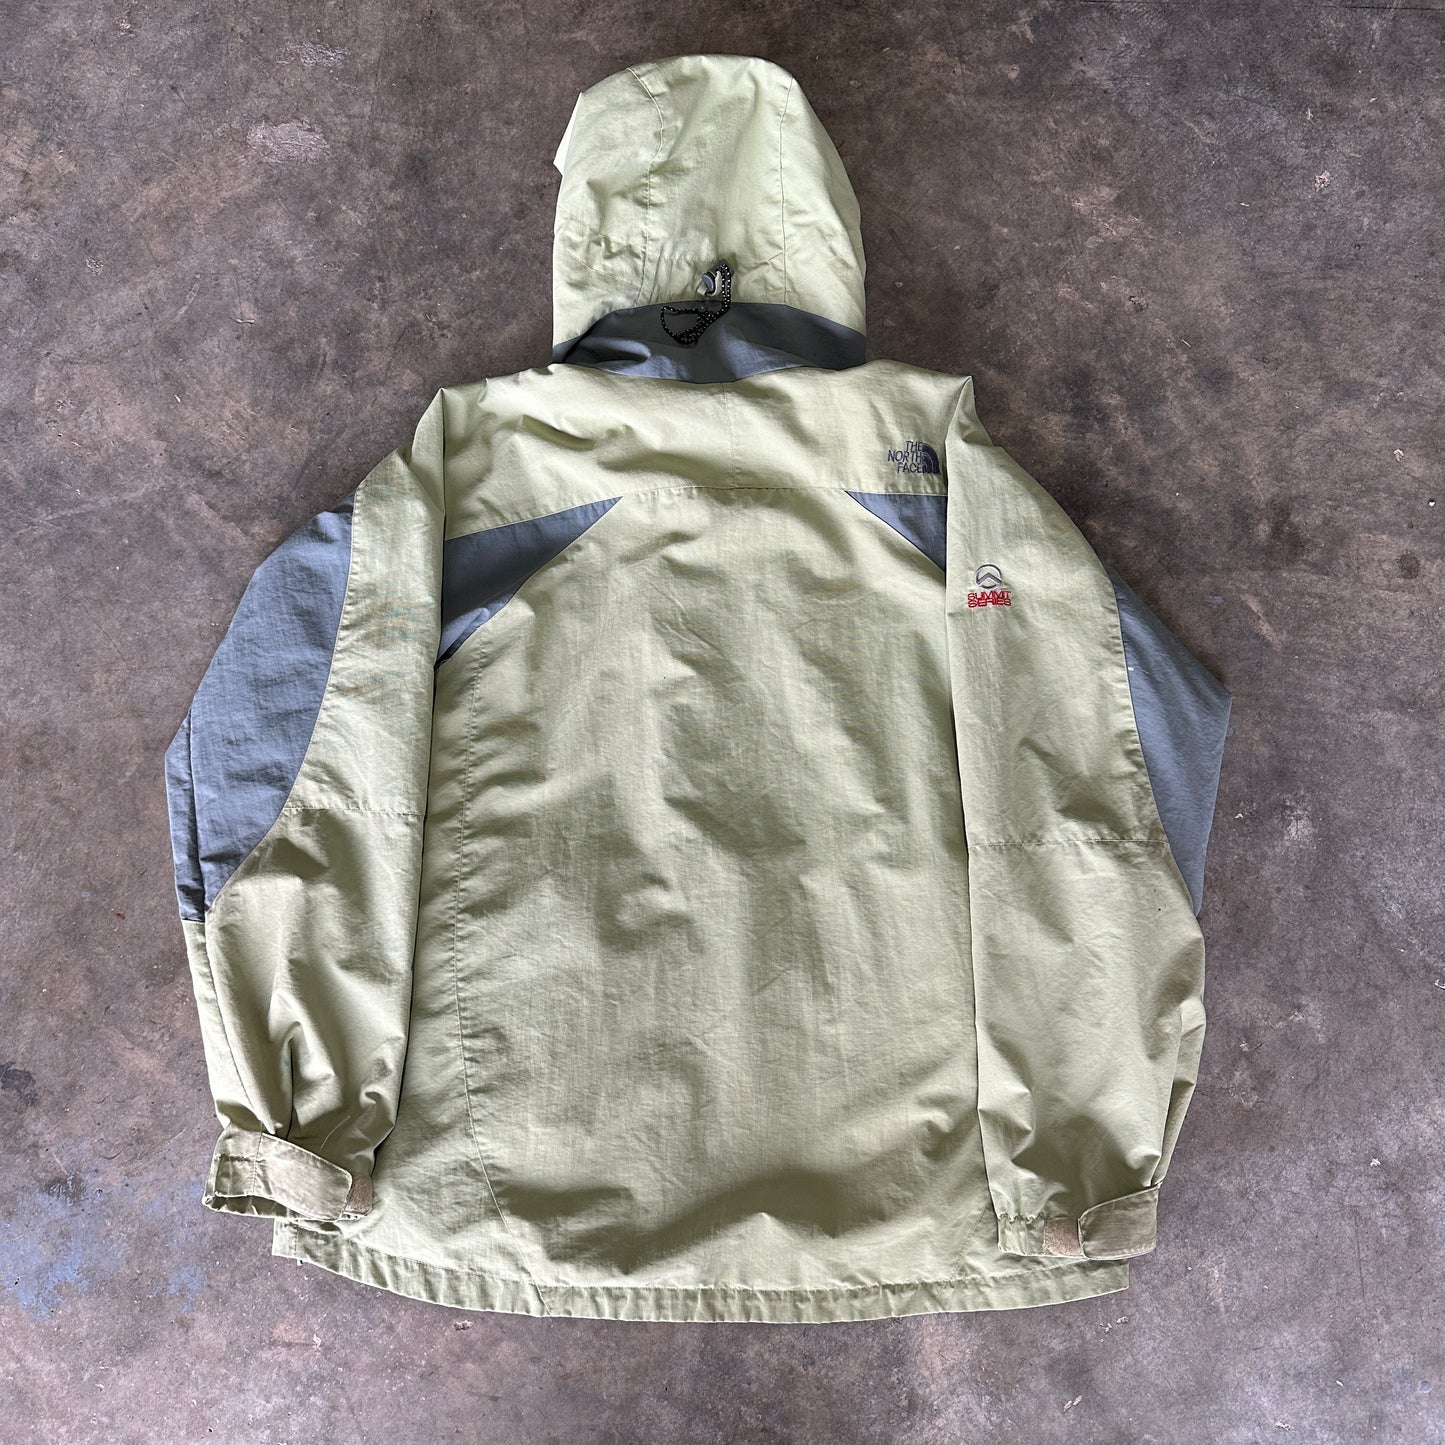 The North Face "HyVent" Full-Zip Jacket